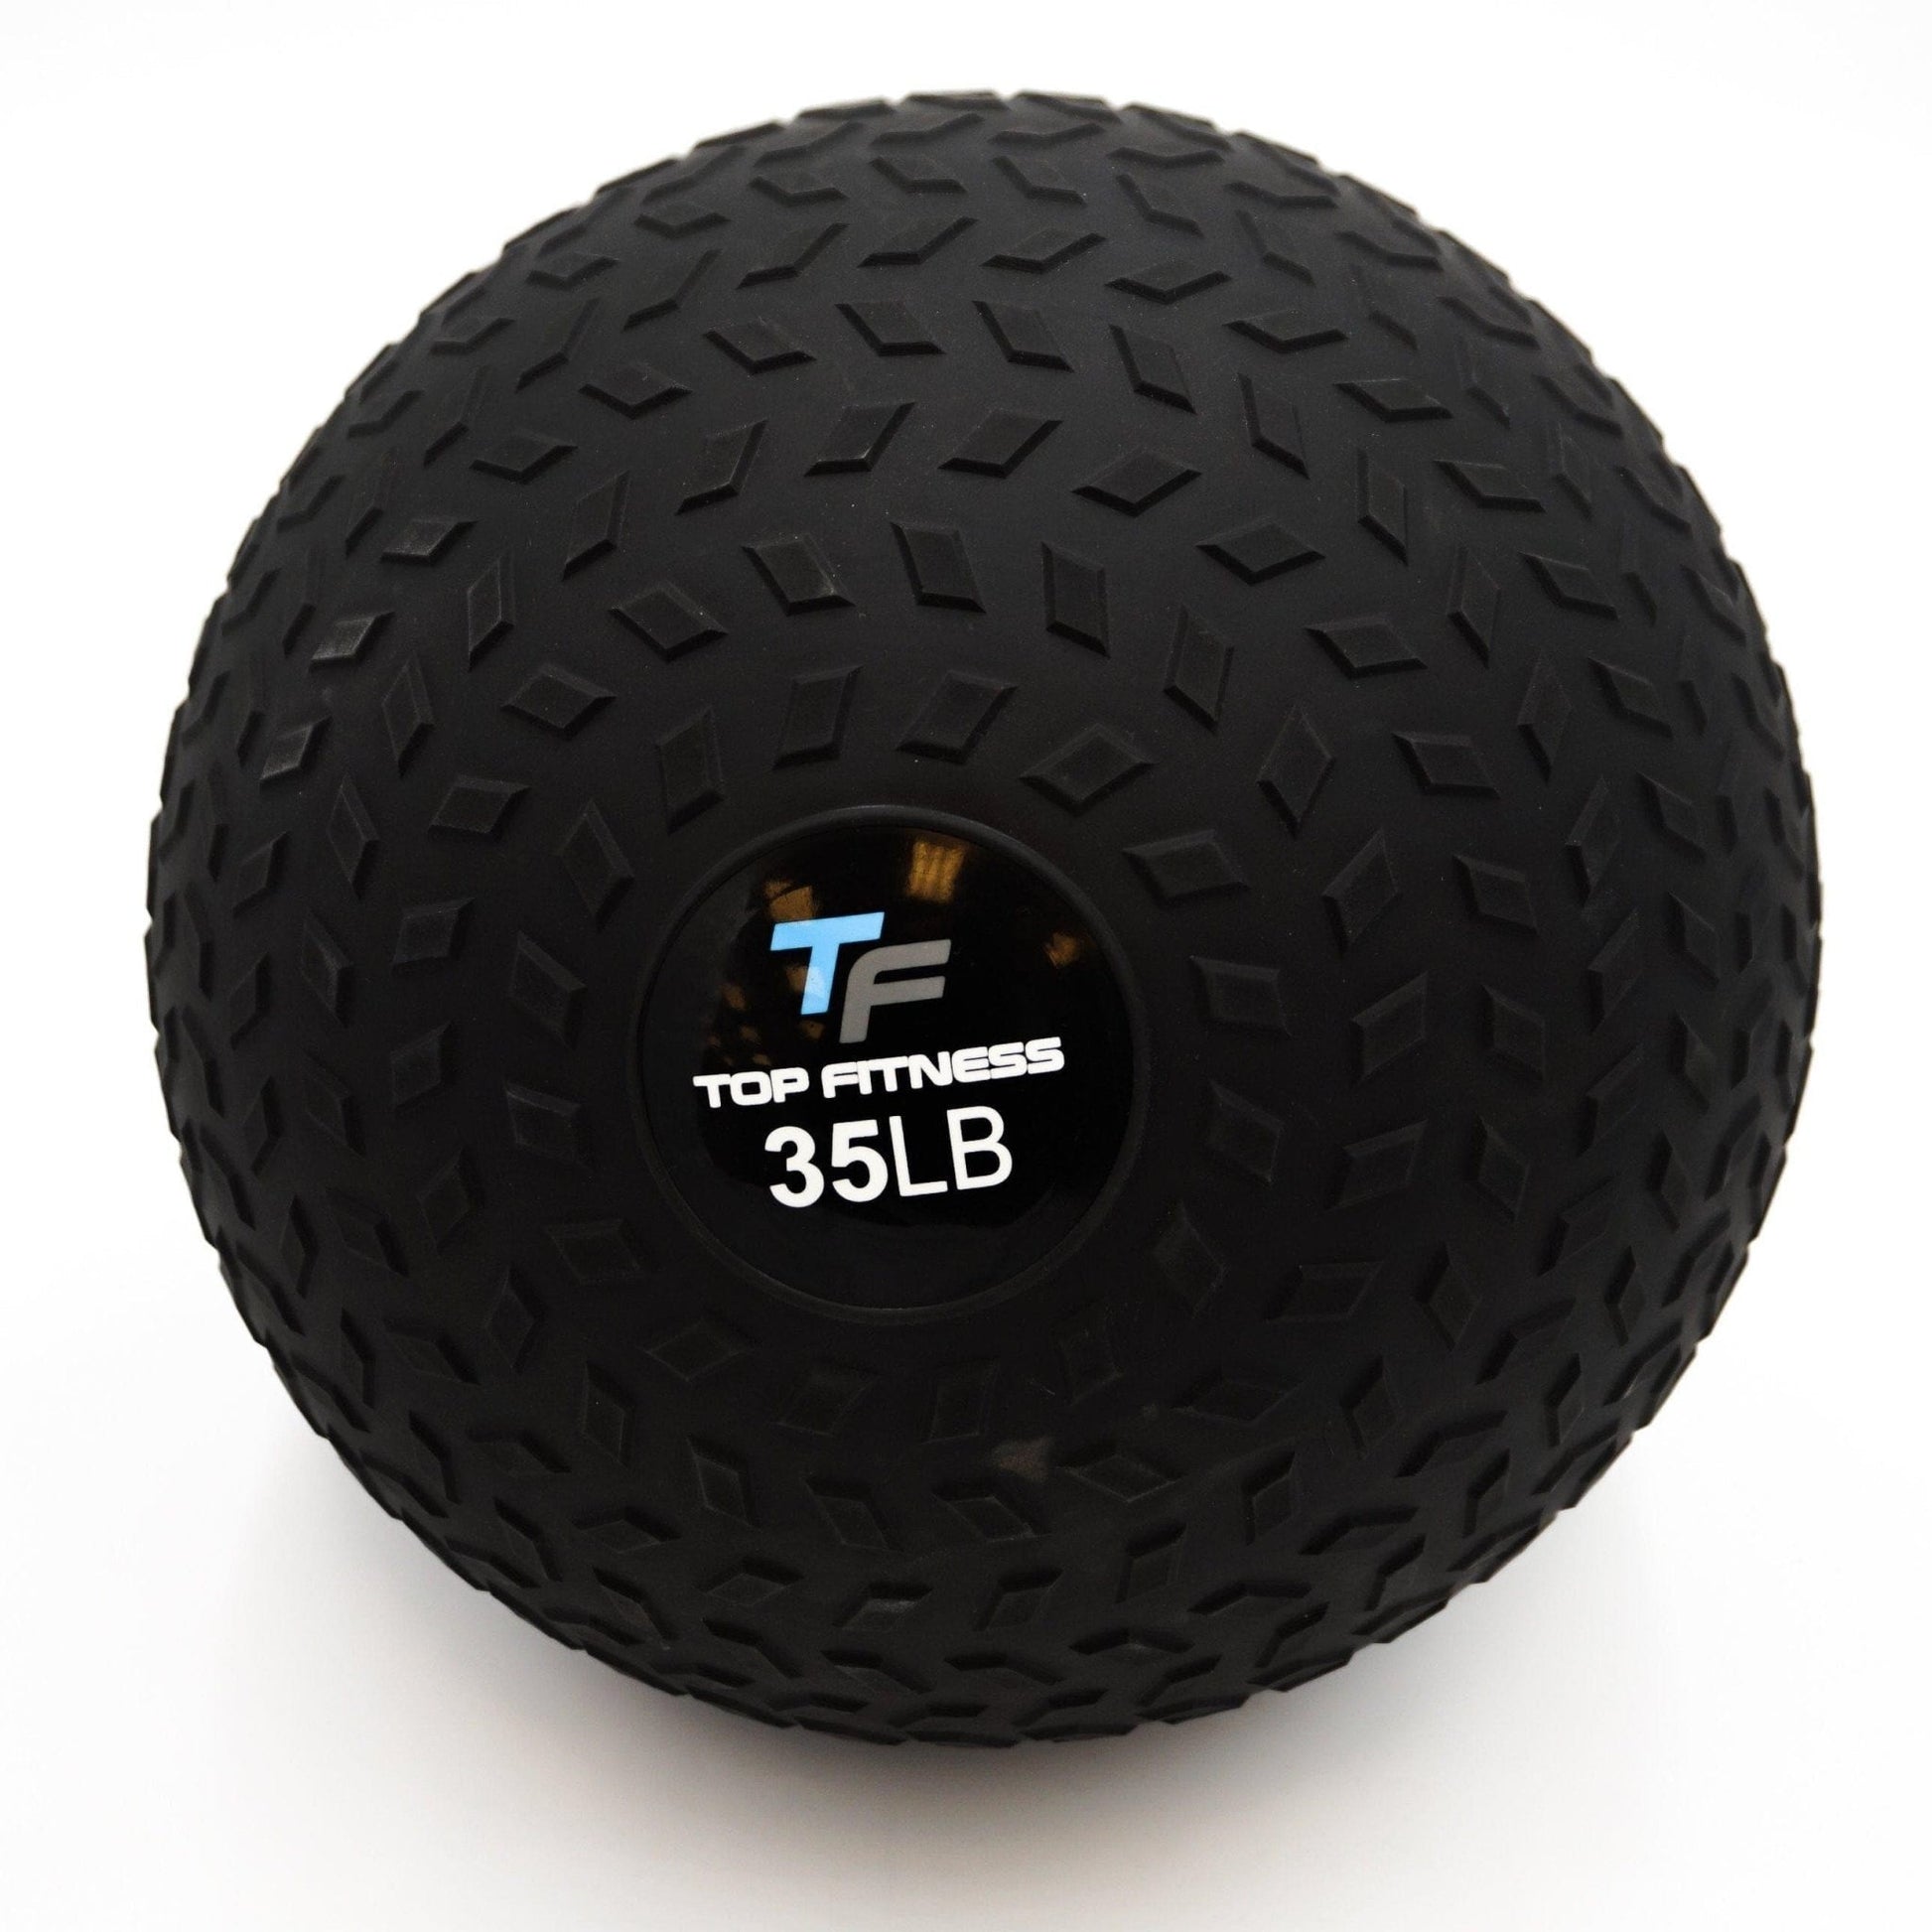 Top Fitness Slam Ball Weighted Resistance Top Fitness 35lb